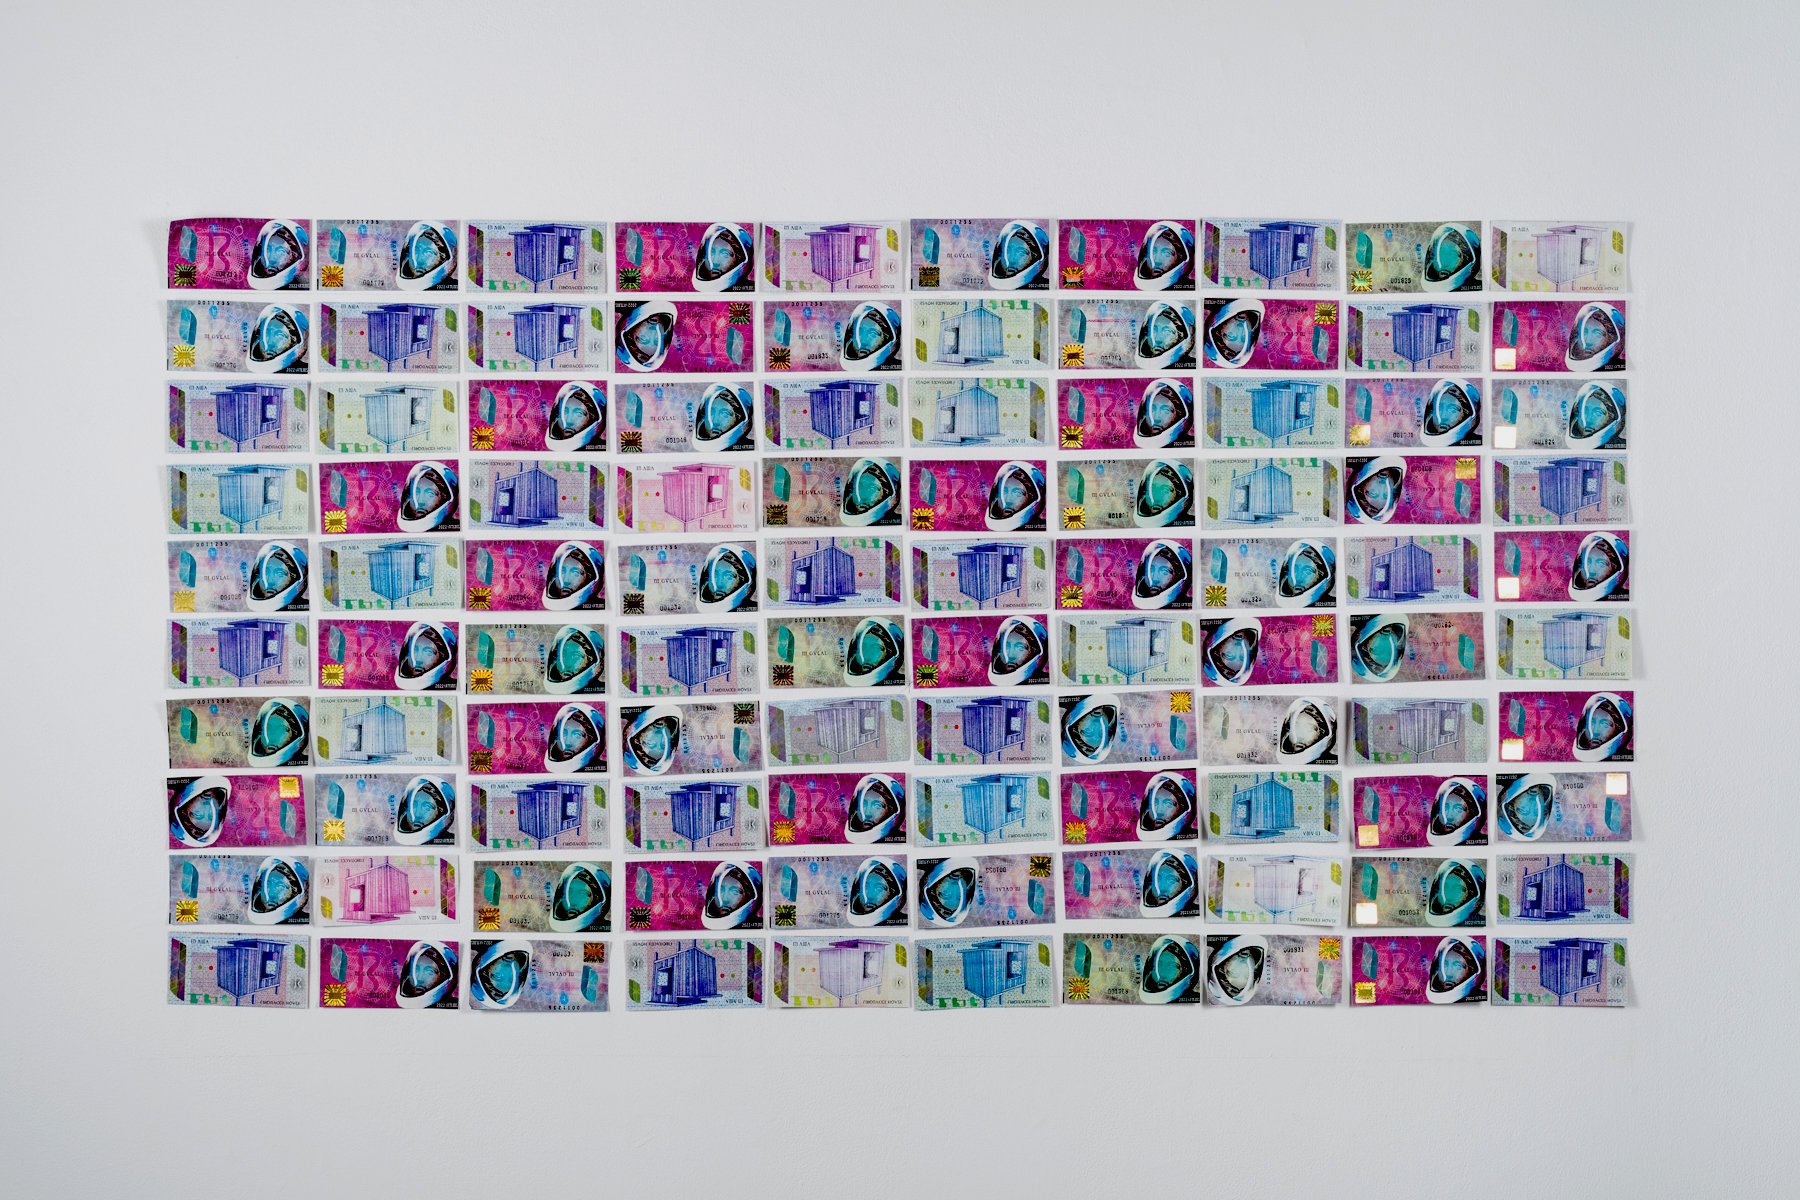   Untitled  2022 Currency 65 x 35 inches 